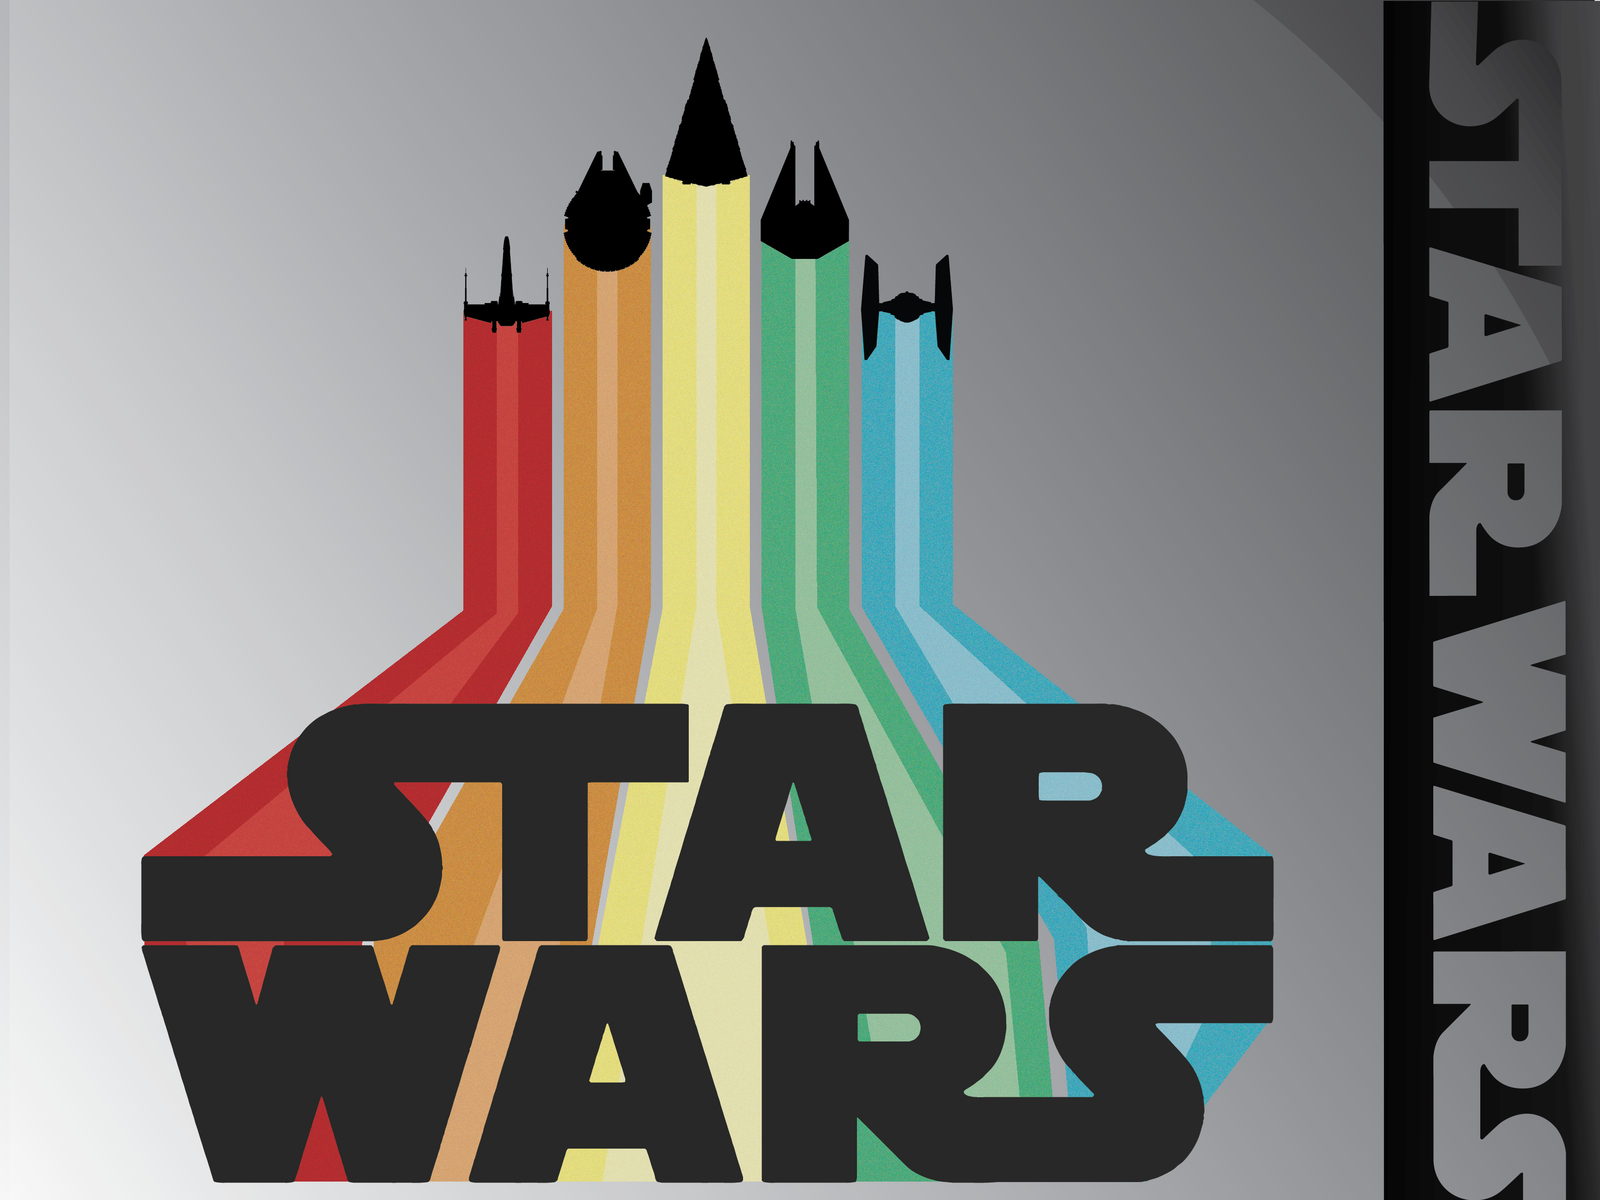 RETRO STAR WARS by Troy Bee on Dribbble